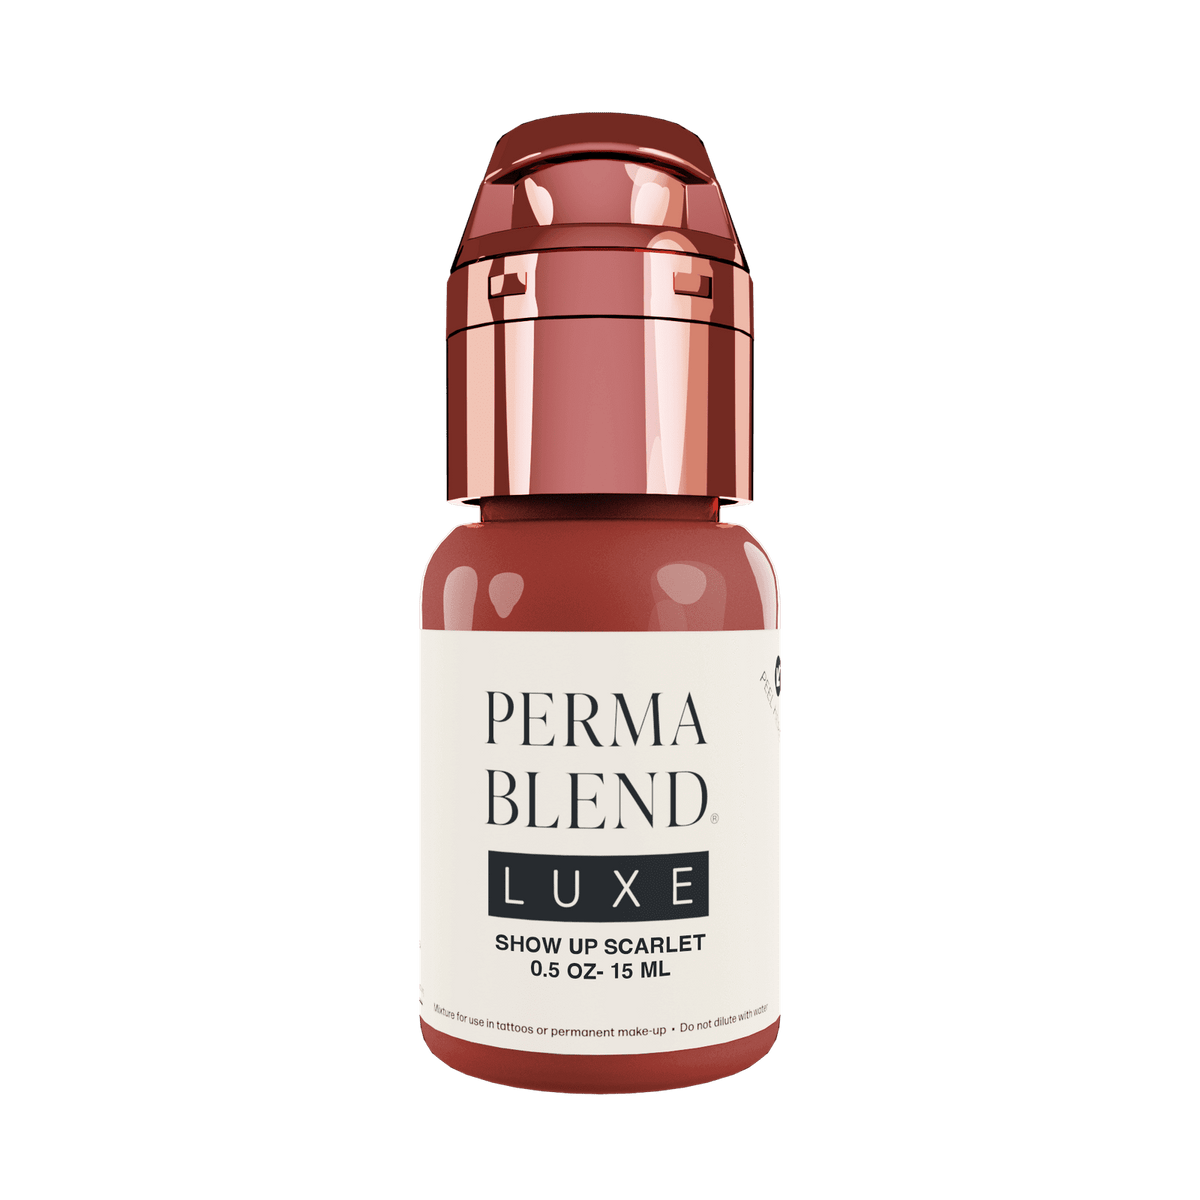 Perma Blend Luxe Show Up Scarlet